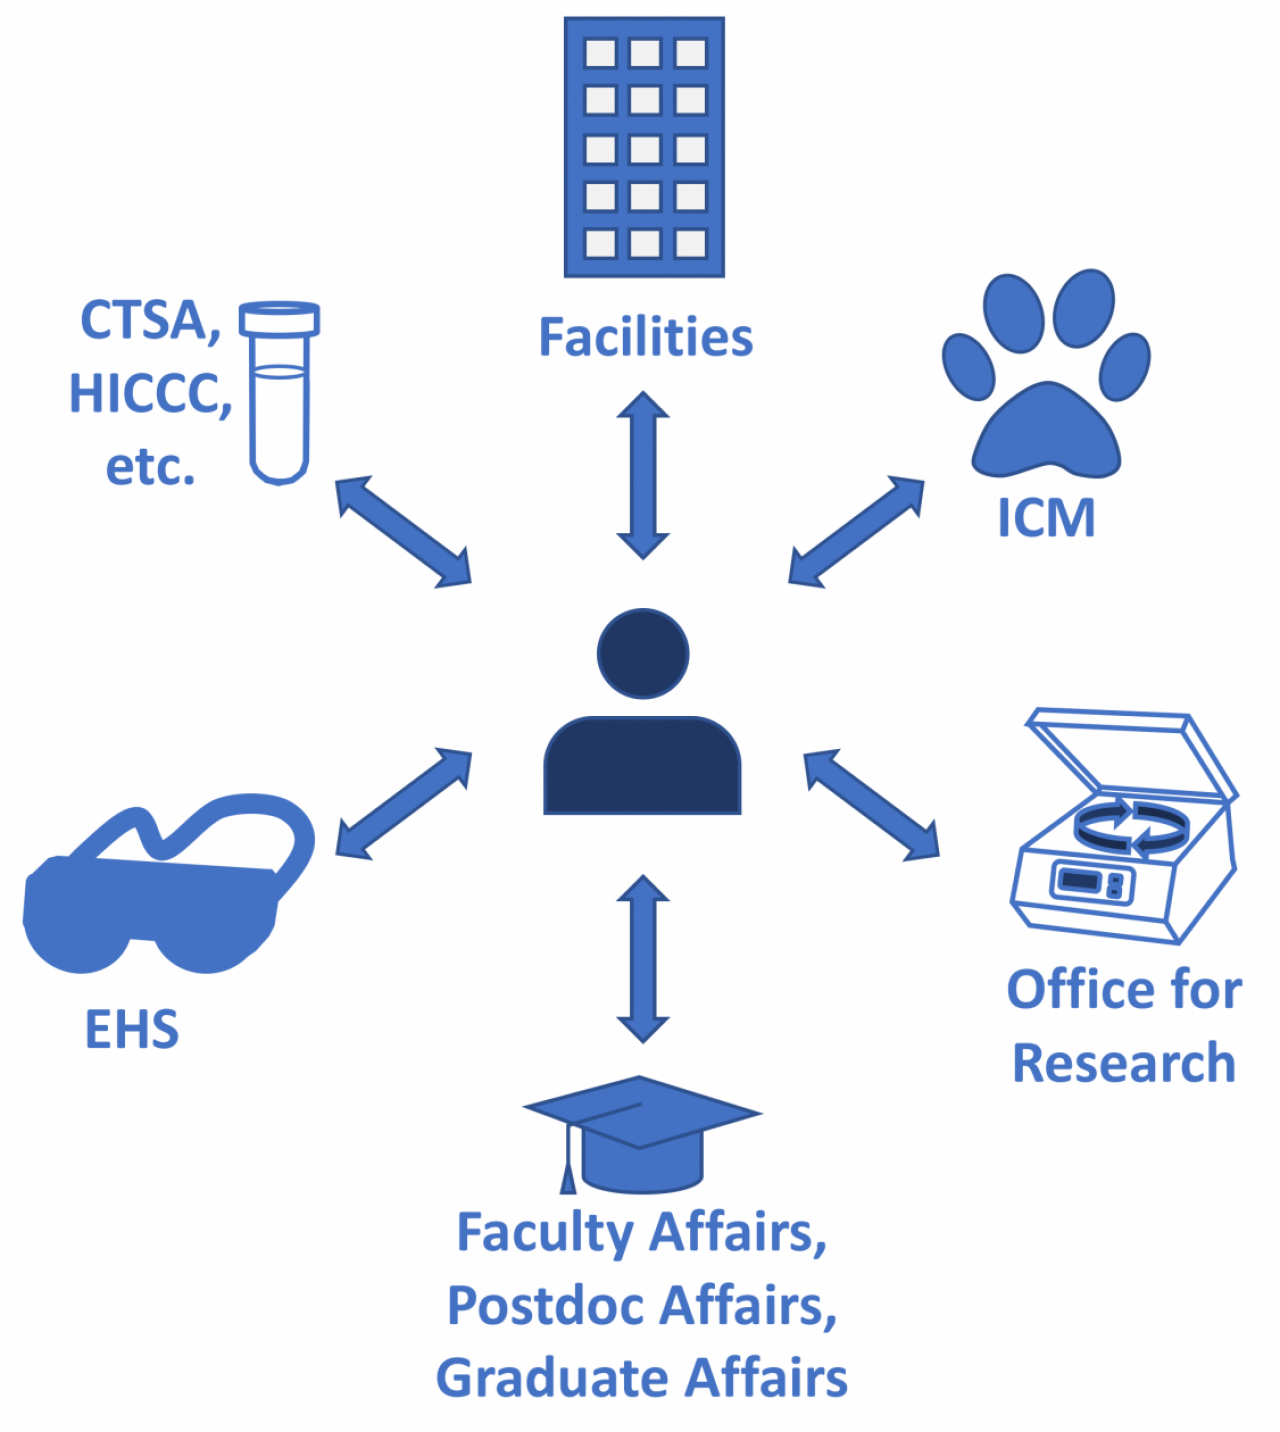 A central person icon with arrows connecting to icons representing different offices, including a pawprint (ICM), building (Facilities), test tube (CTSA, HICCC, etc.), safety googles (EH&S), mortarboard (Faculty/Graduate/Postdoctral Affairs), and a centrifuge (Office for Research).